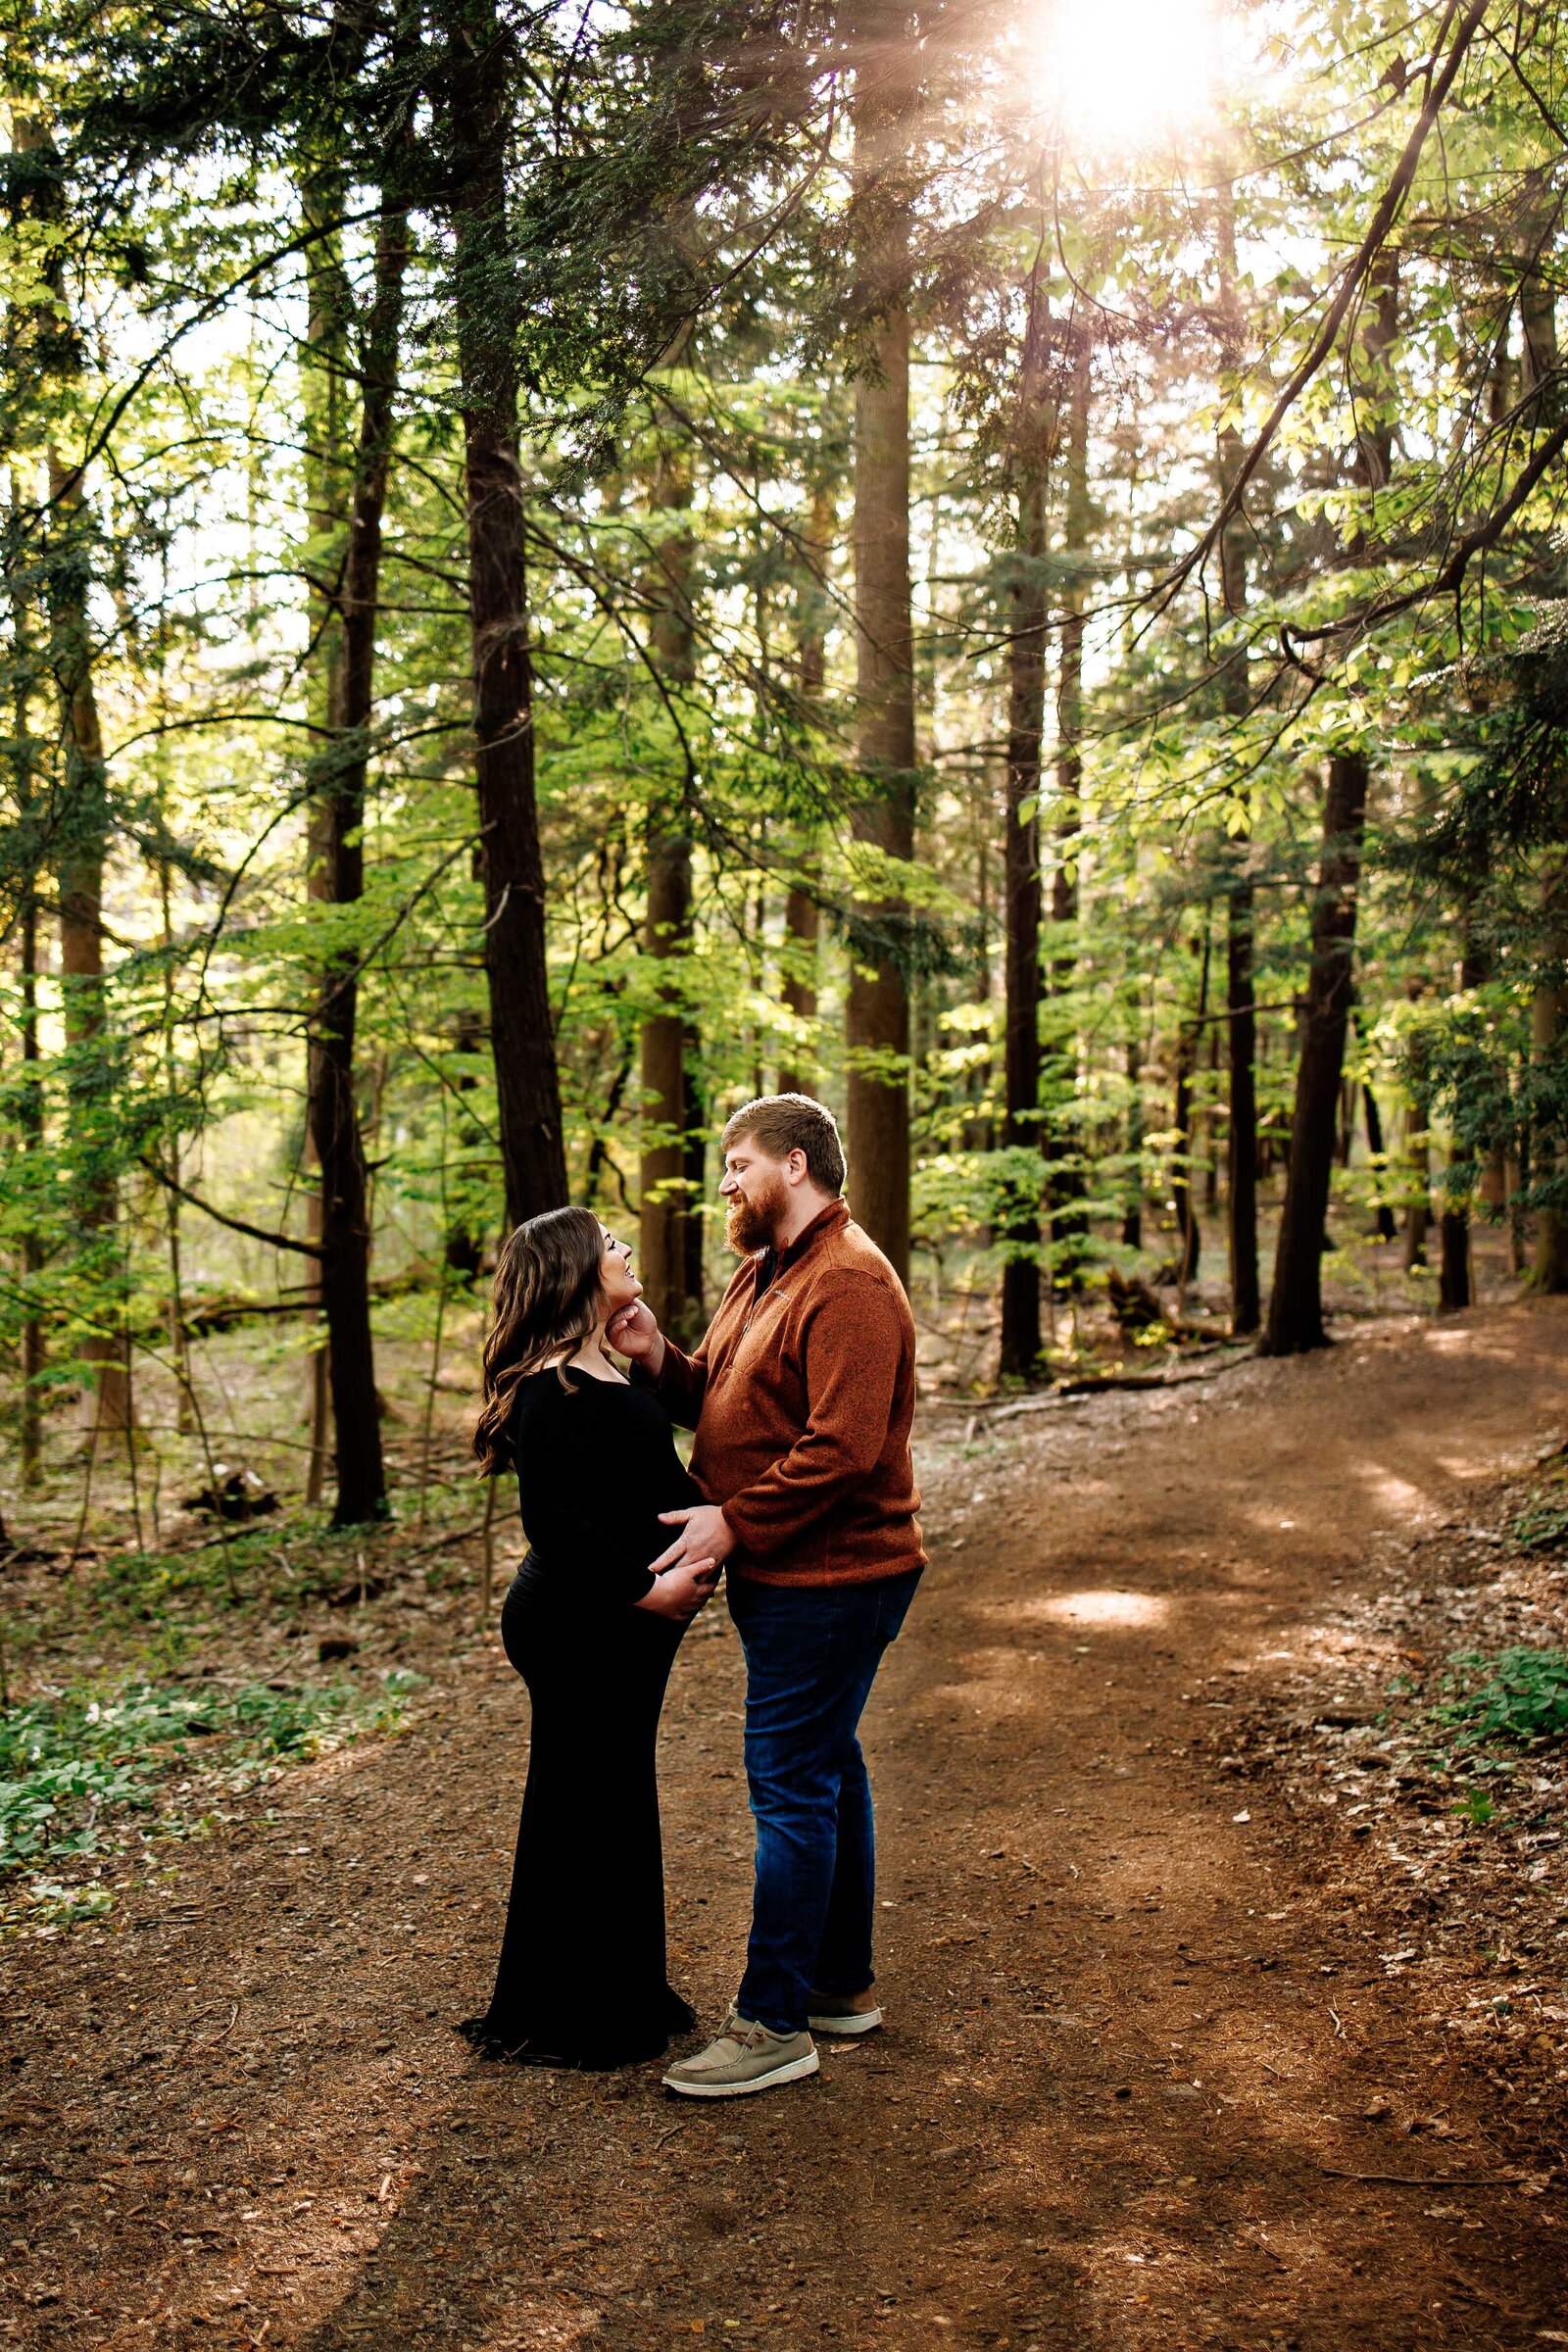 Expecting mother stands with her husband along a wooded path